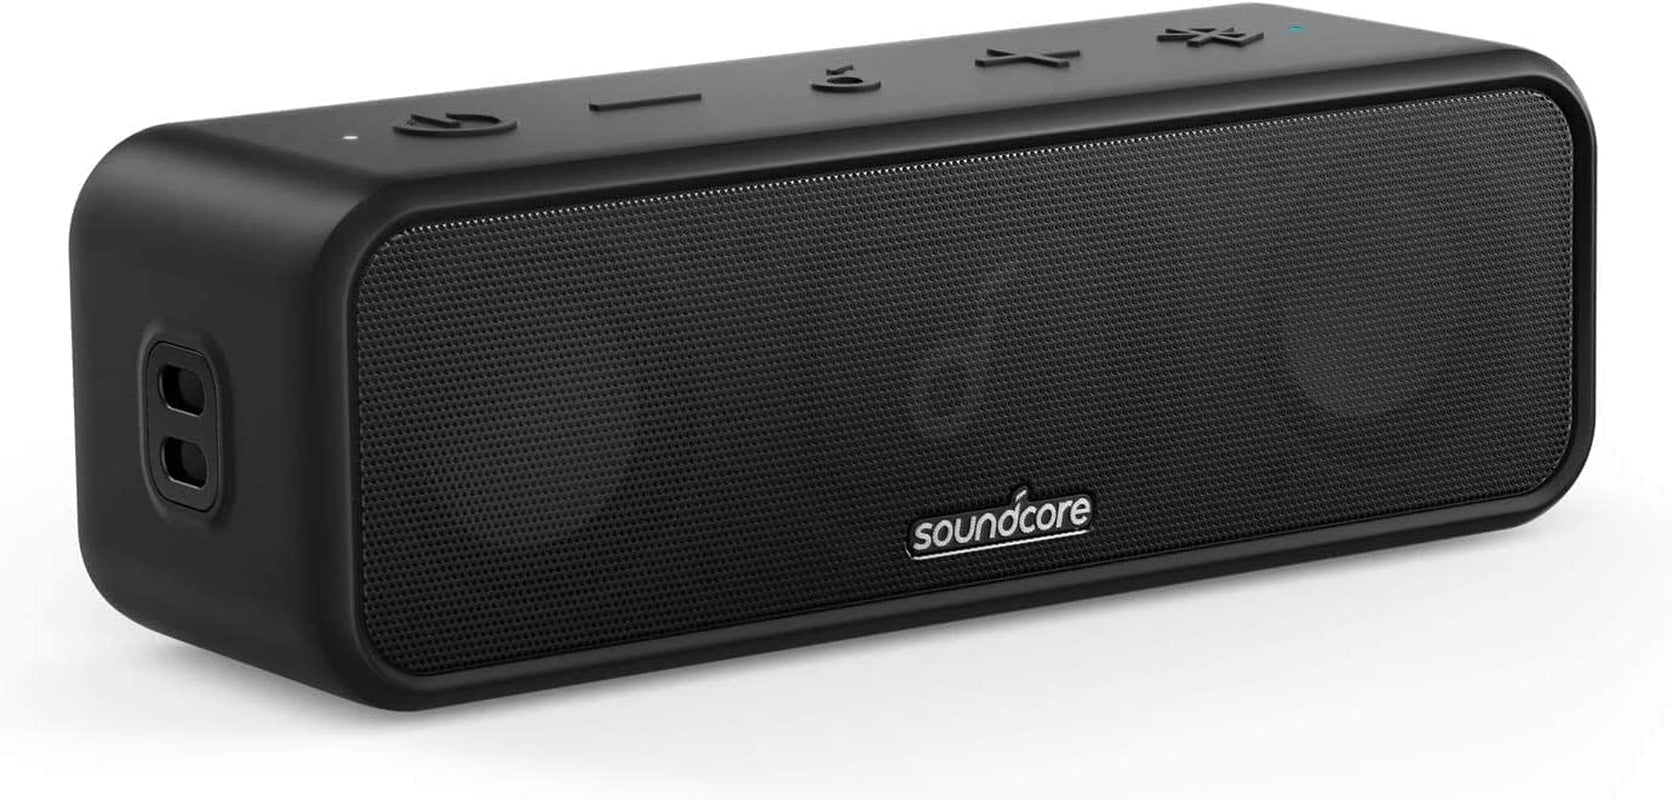 3 Portable Bluetooth Speaker - Wireless, IPX7 Waterproof, 24H Playtime, Pure Titanium Diaphragm Drivers, Partycast, Bassup, Custom EQ App - for Home, Outdoor, and Beach